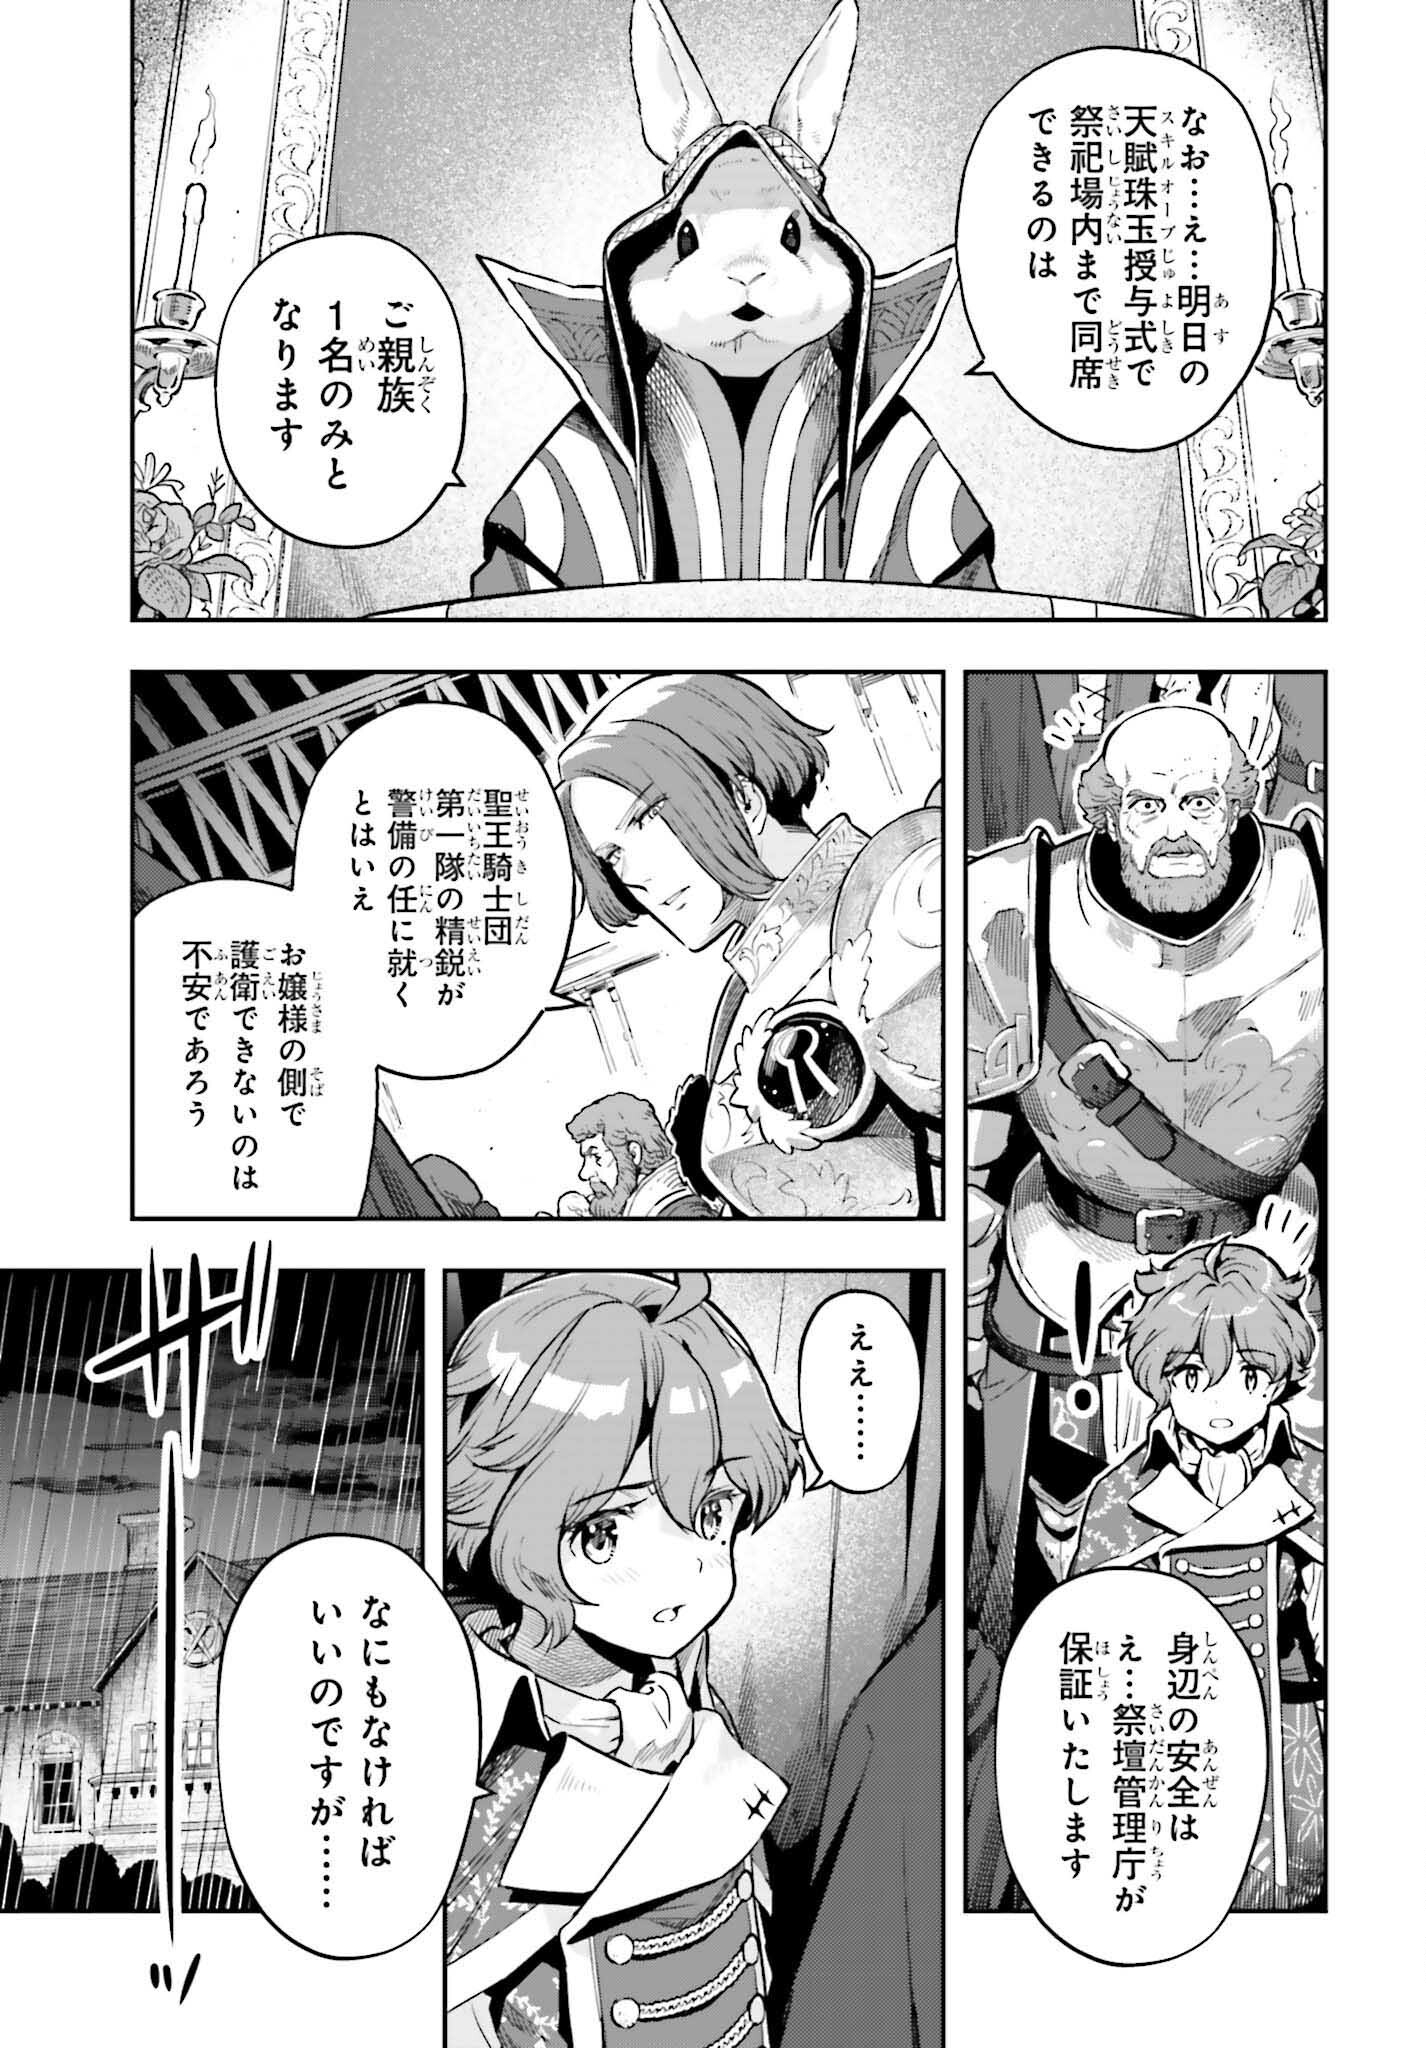 Only the Reincarnated Can Conquer the “Over Limited Skill Orb” Over Limit Skill Holder 第23話 - Page 3